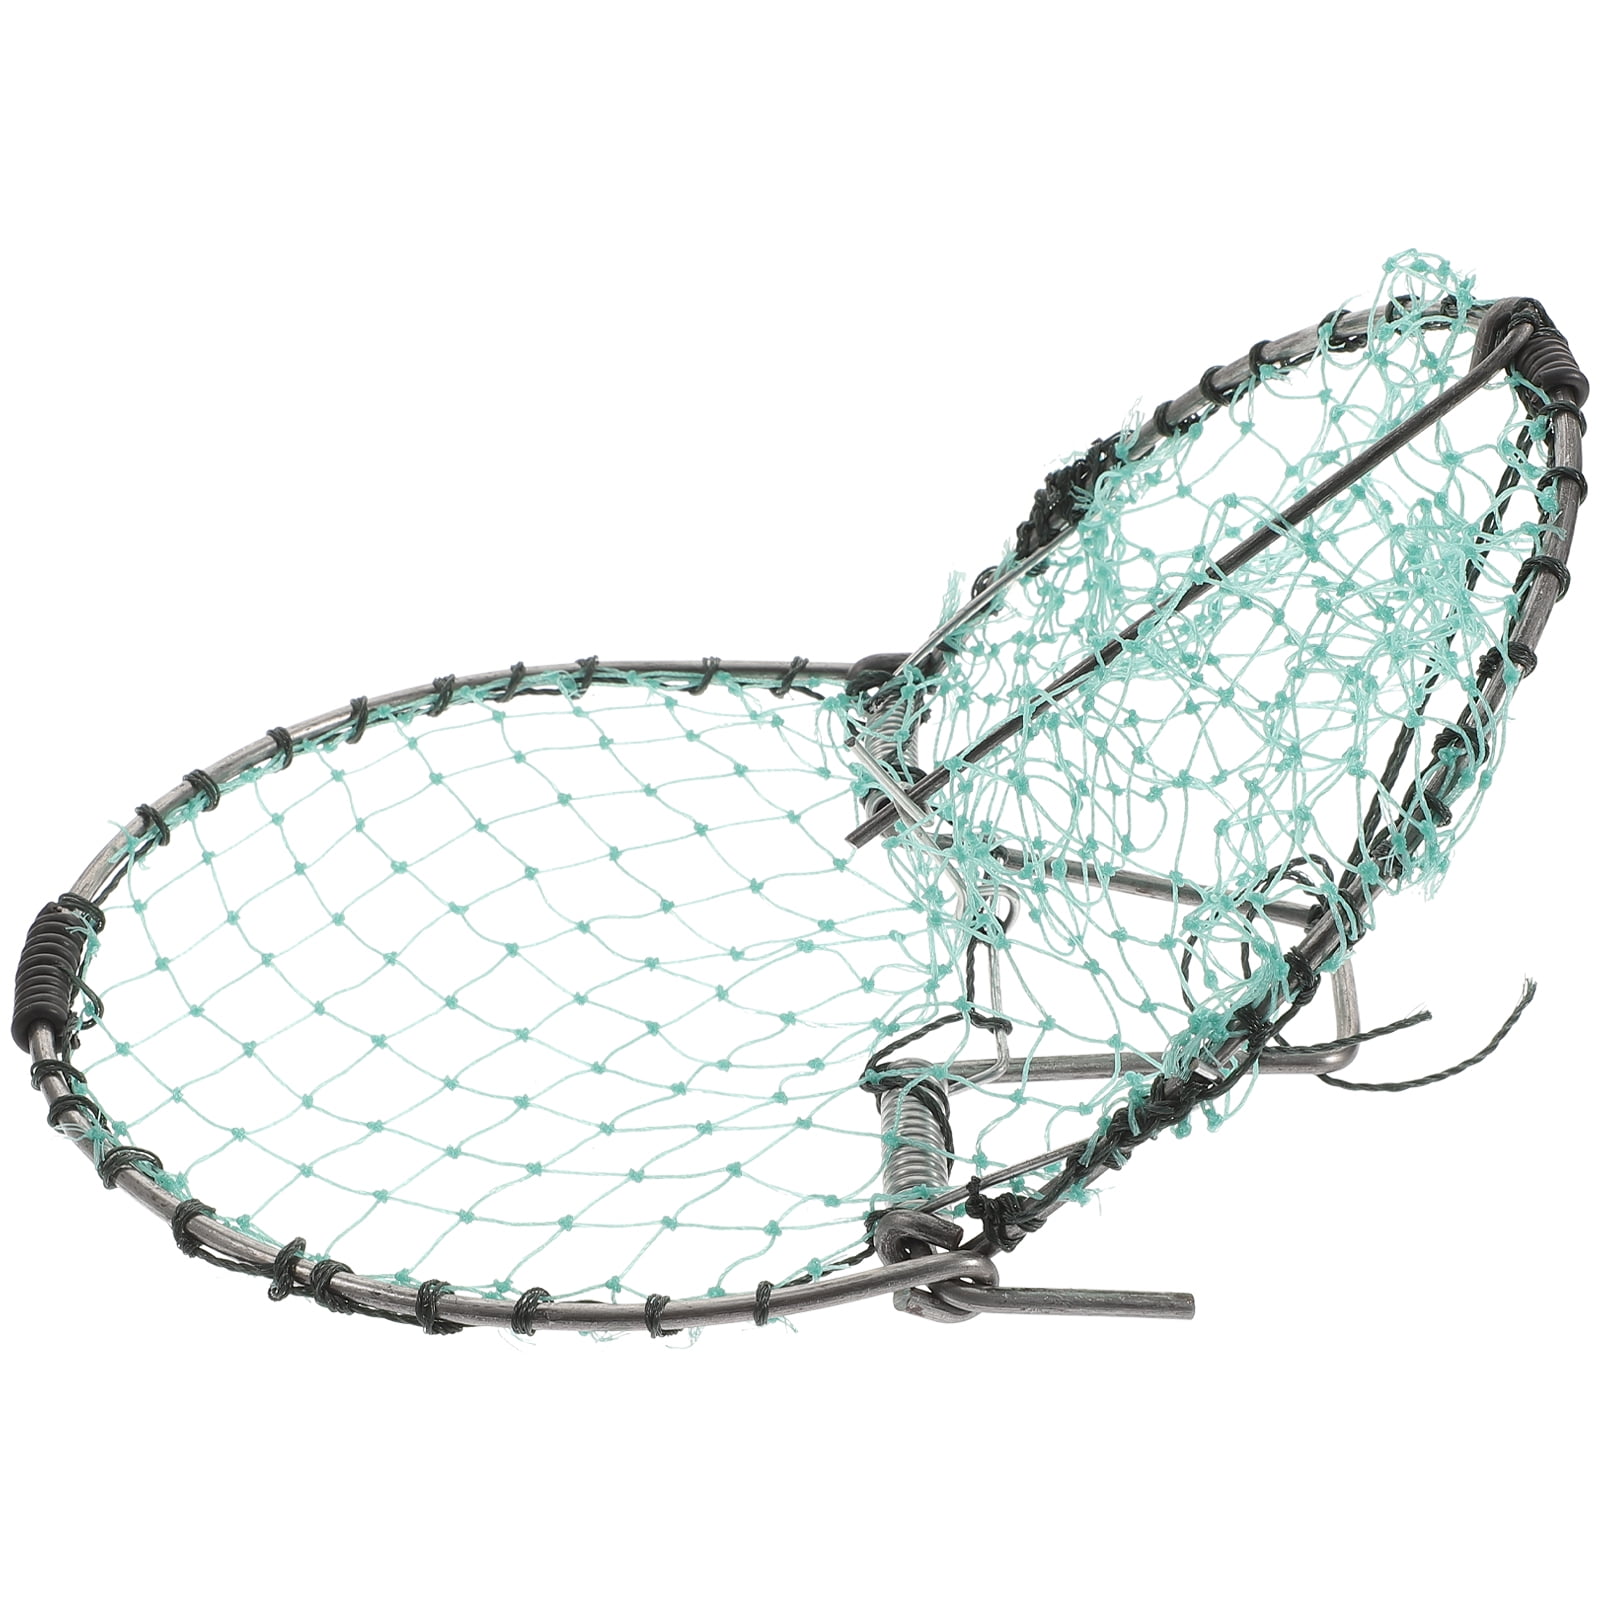 Bird Net Pigeon Catching Yard Trap Netting Reusable Where Cage